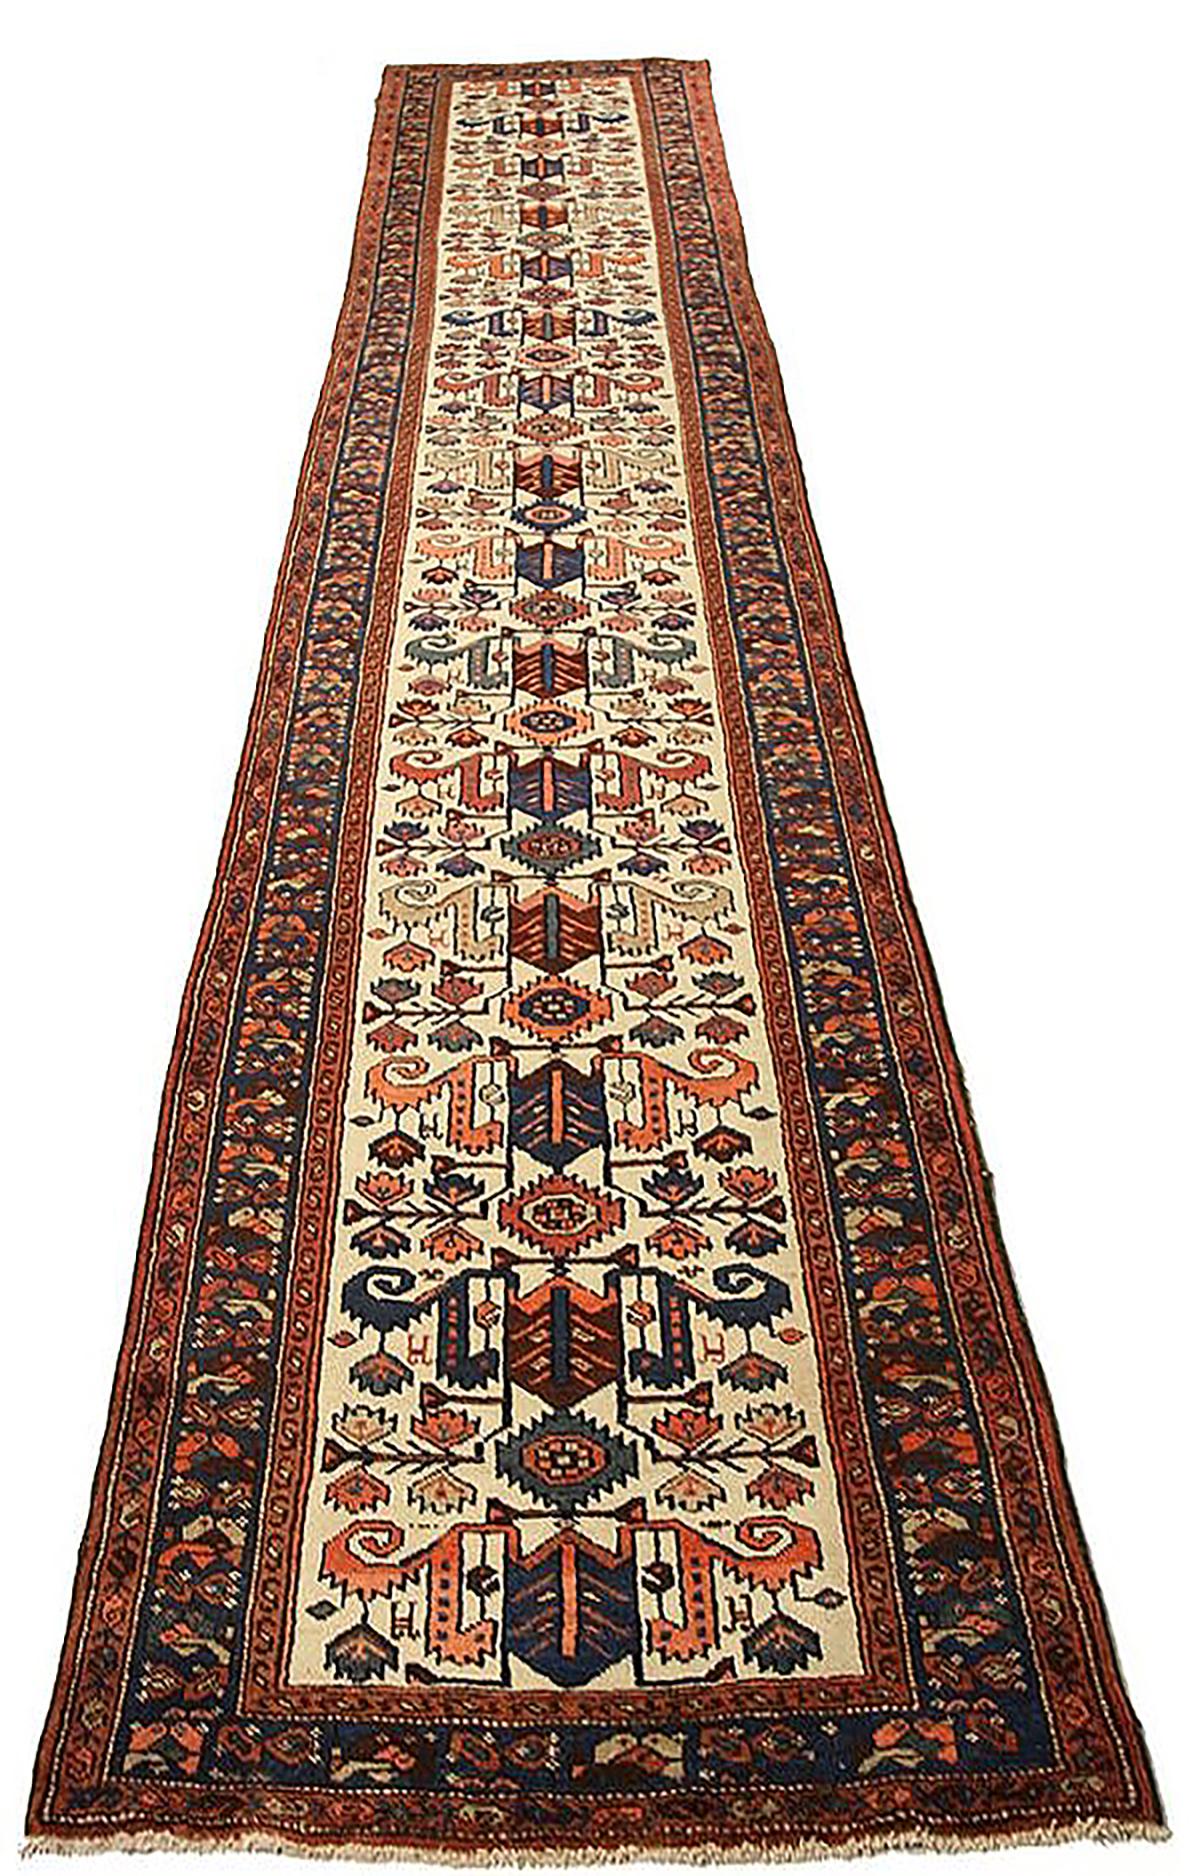 Antique Persian runner rug handwoven from the finest sheep’s wool and colored with all-natural vegetable dyes that are safe for humans and pets. It’s a traditional Malayer design featuring a mixed navy, green, and red combination of floral and